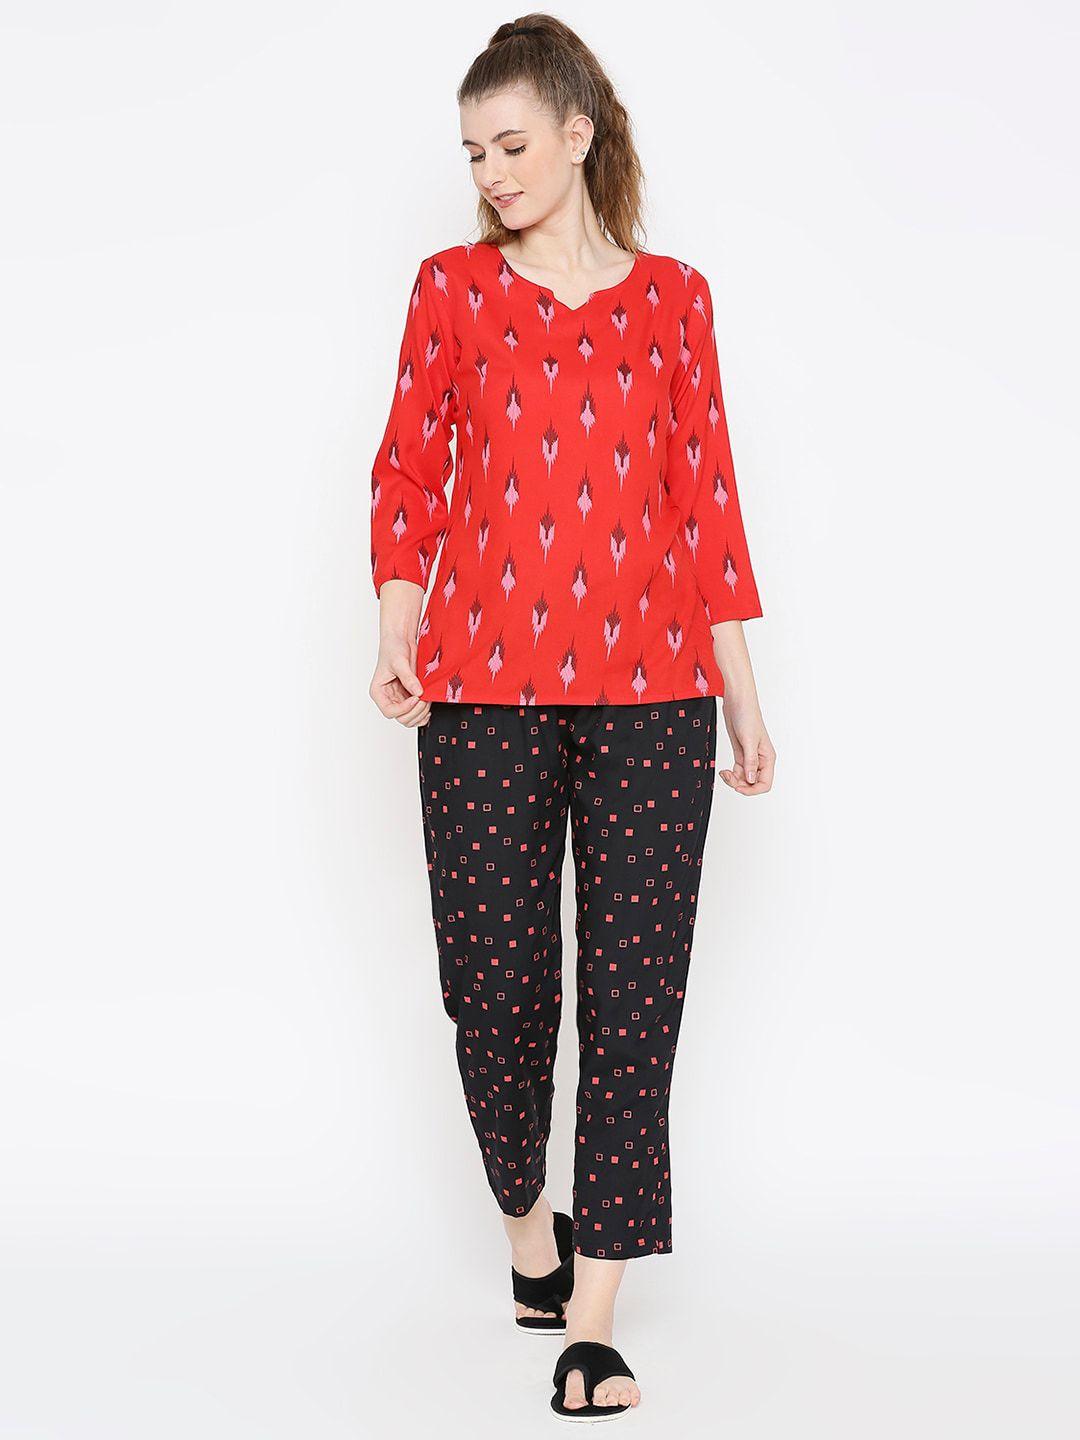 smarty pants women red & black printed night suit